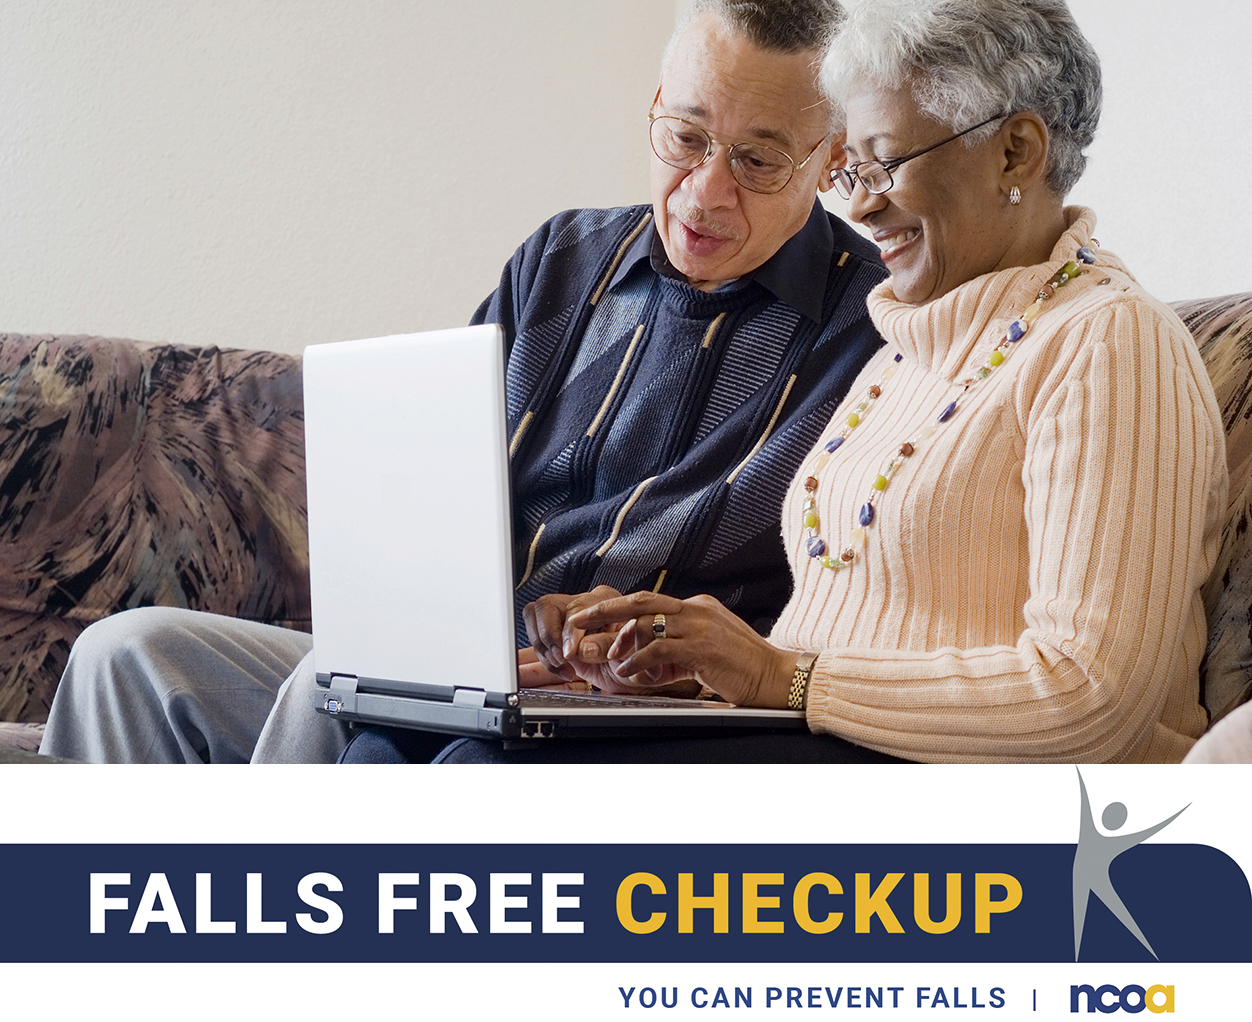 Falls Free CheckUp can be done online